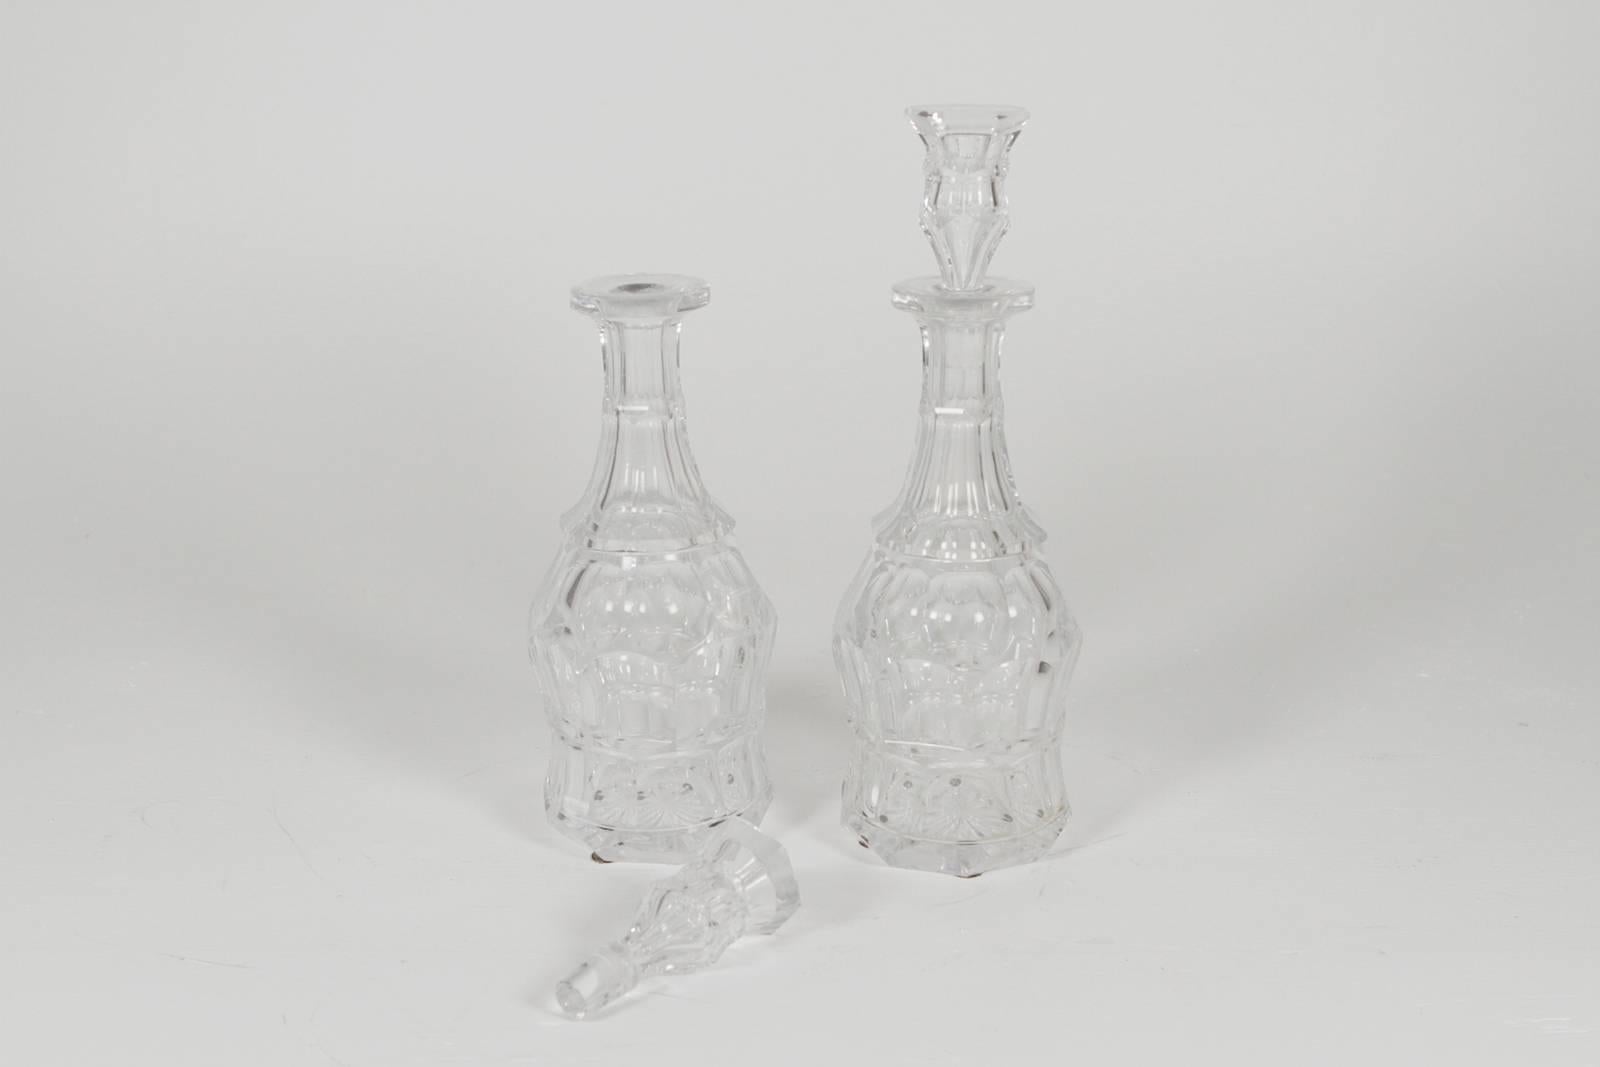 Pair of Baccarat crystal liquor decanters. Exquisite panel cut sides in water clear crystal with original stoppers.